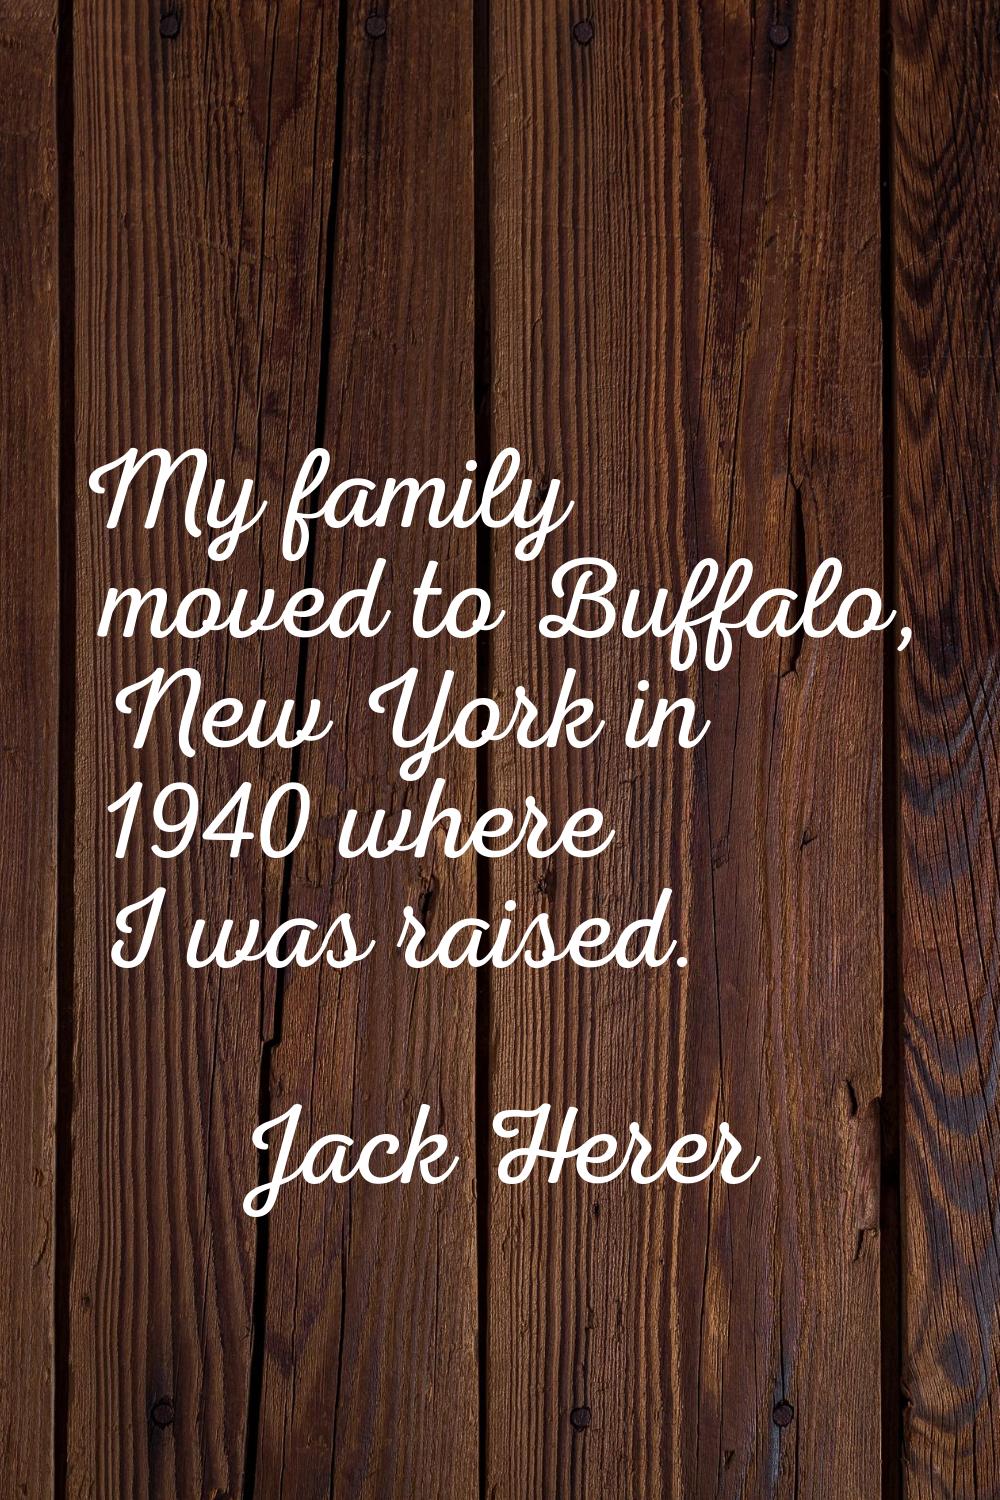 My family moved to Buffalo, New York in 1940 where I was raised.